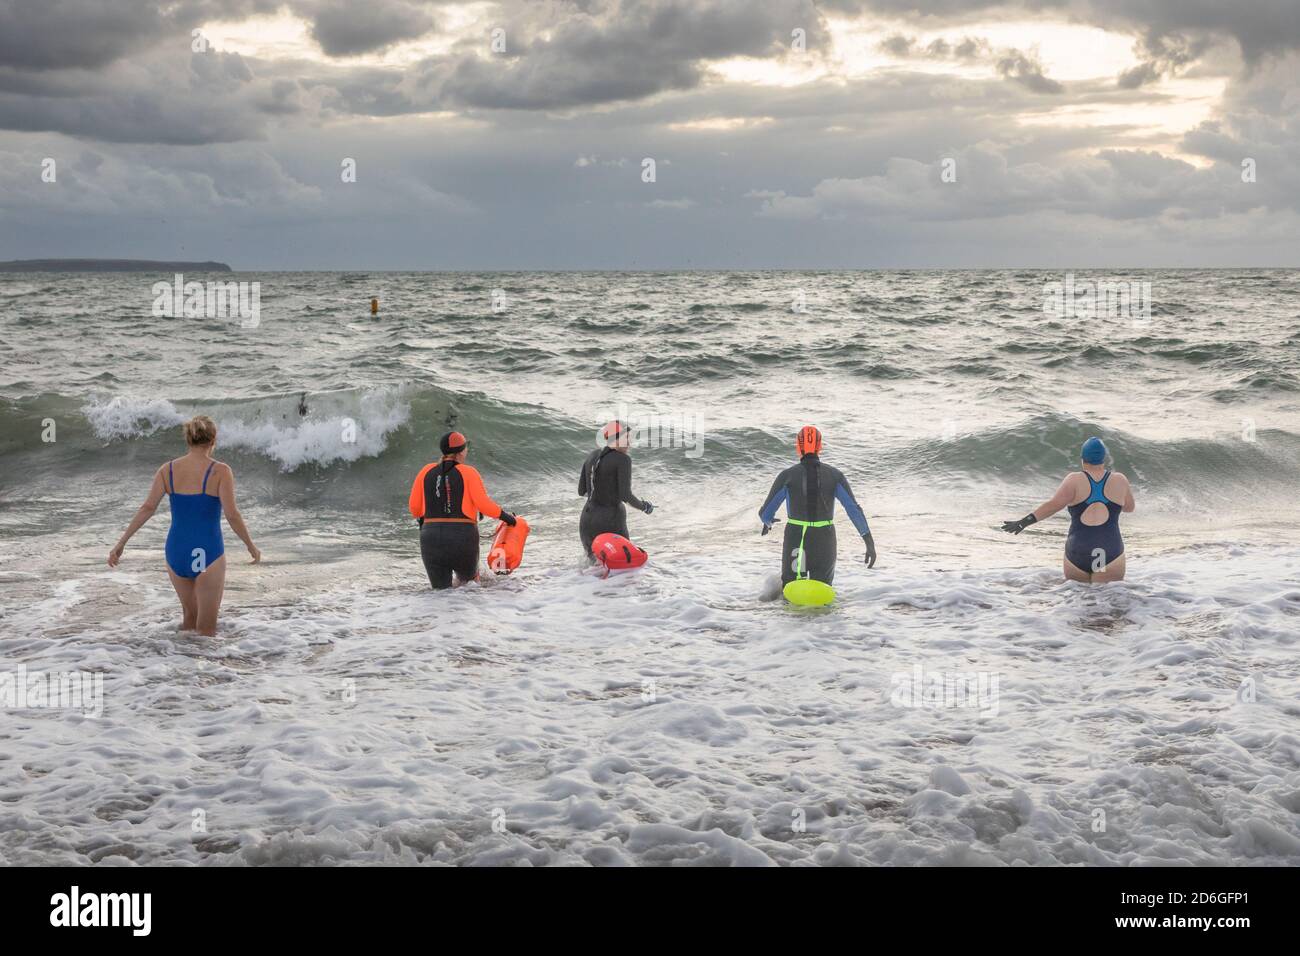 Myrtleville, Cork, Ireland. 17th October, 2020. Sunrise swimmers Dolores Mahony, Eilis O'Keffee, Niamh Cutbert, Claire Levis and Pamela Coniry going for a dawn dip in the cold sea at Myrtleville, Co. Cork, Ireland. - Credit; David Creedon / Alamy Live News Stock Photo